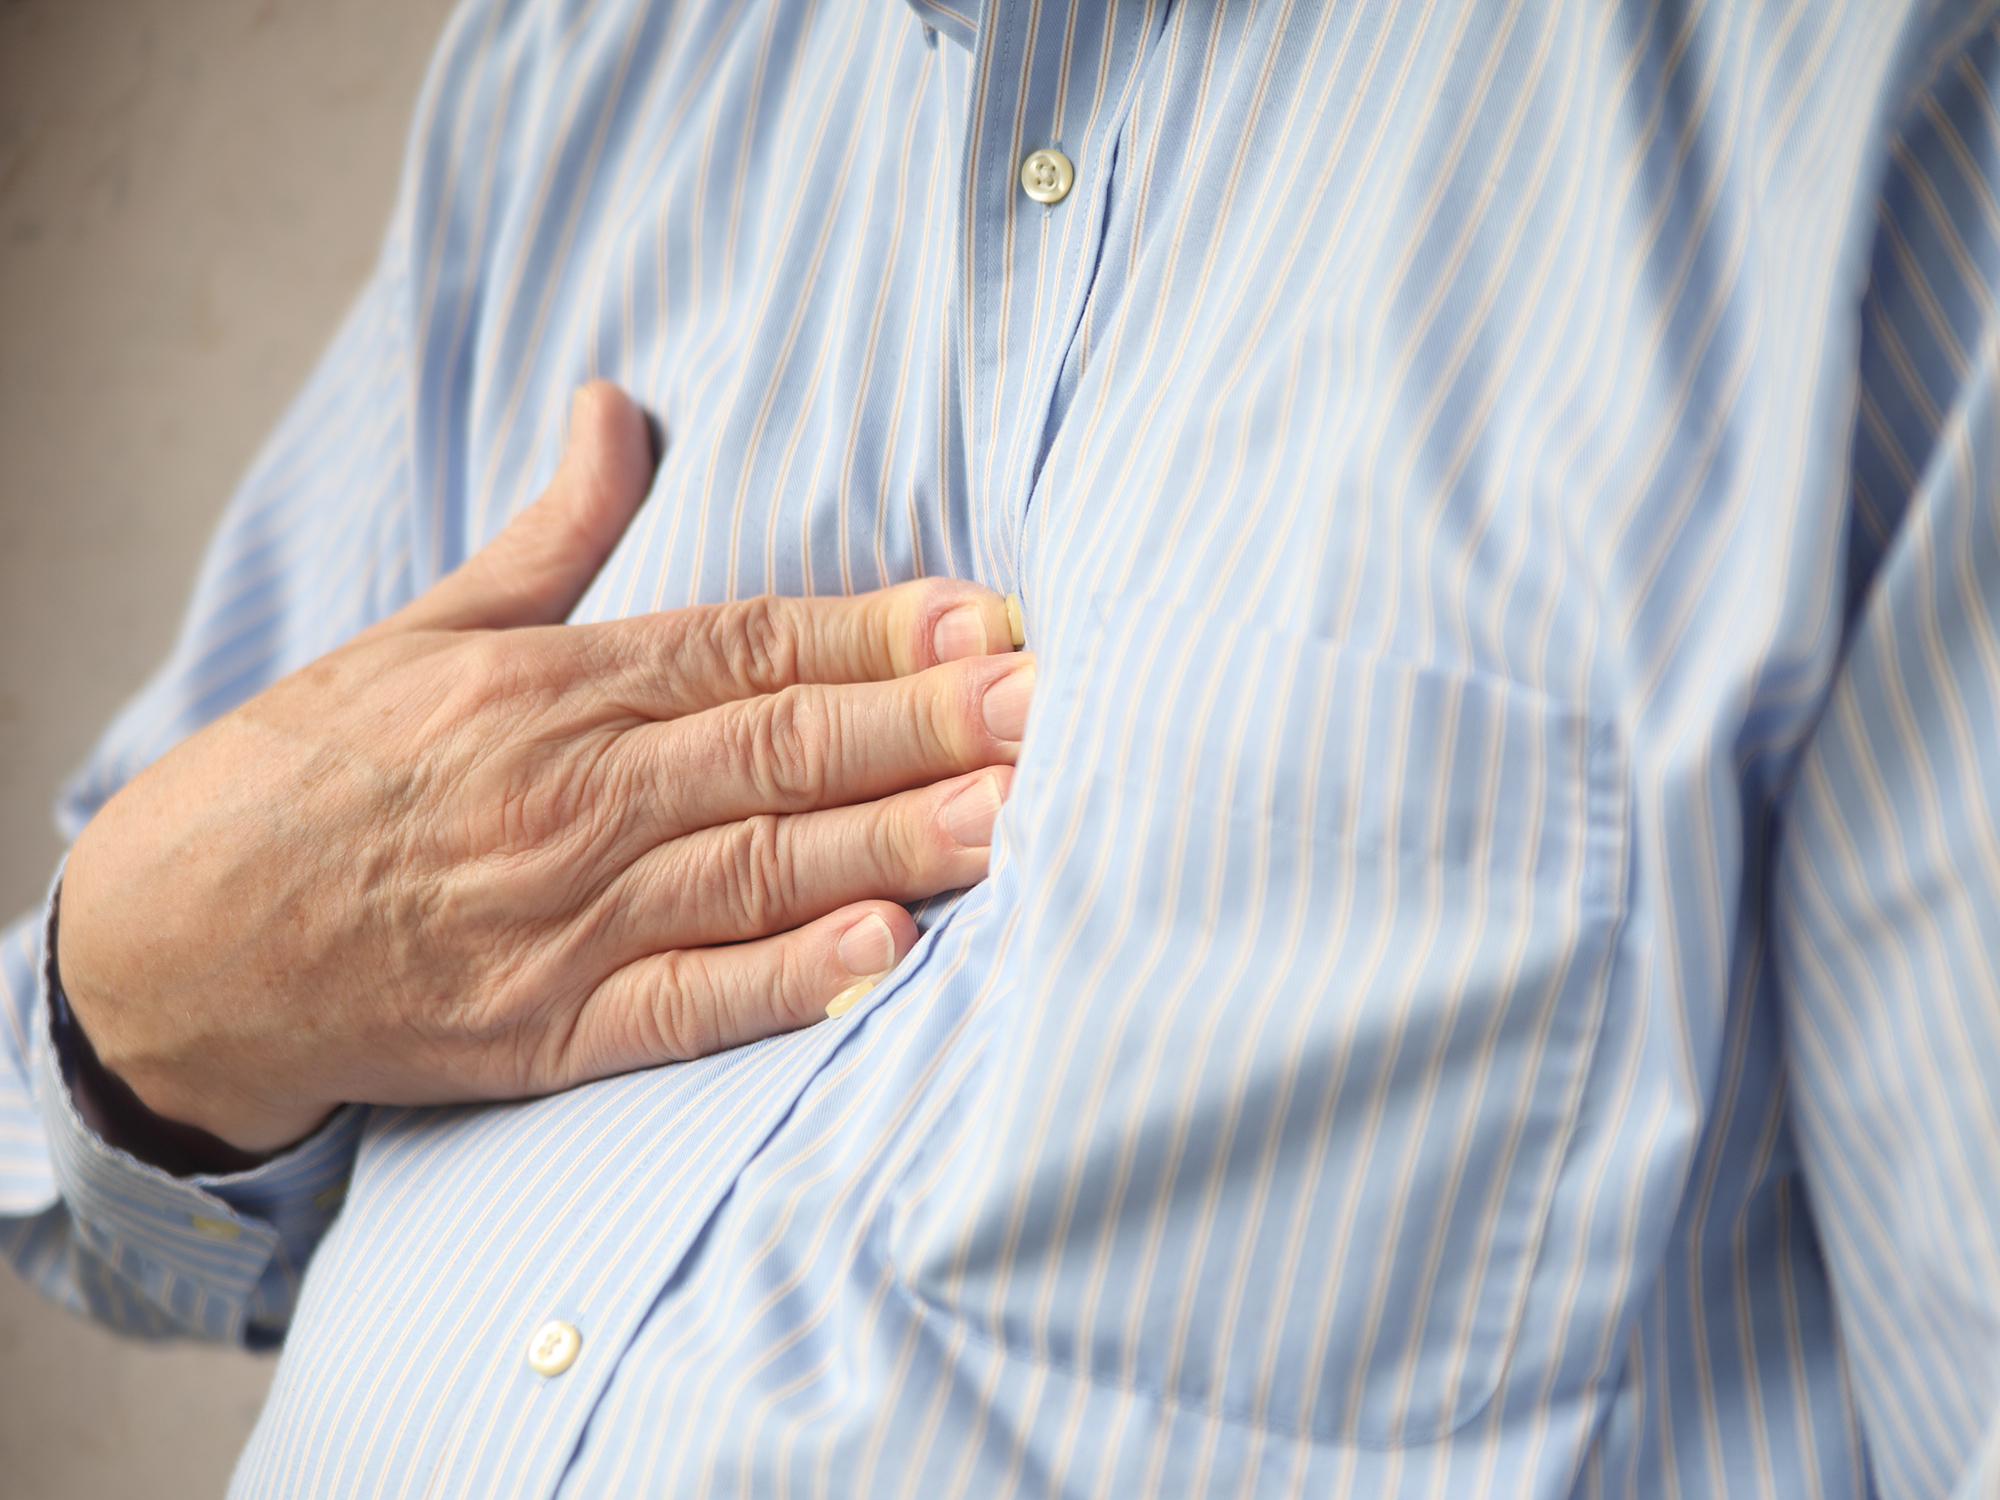 Hiatal hernia and GERD: Symptoms, treatment and prevention